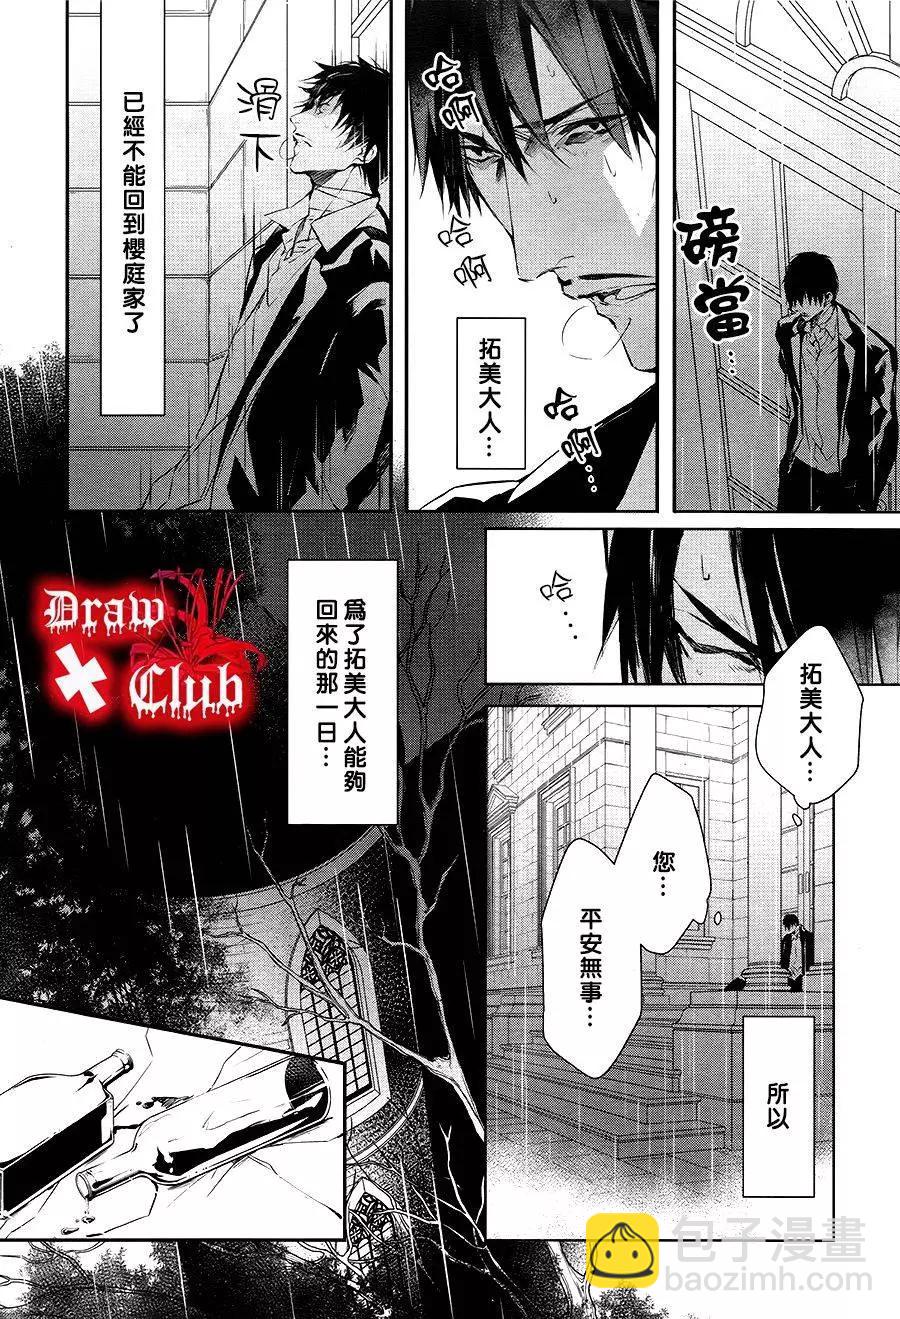 Bloody Mary - 第28回 - 2